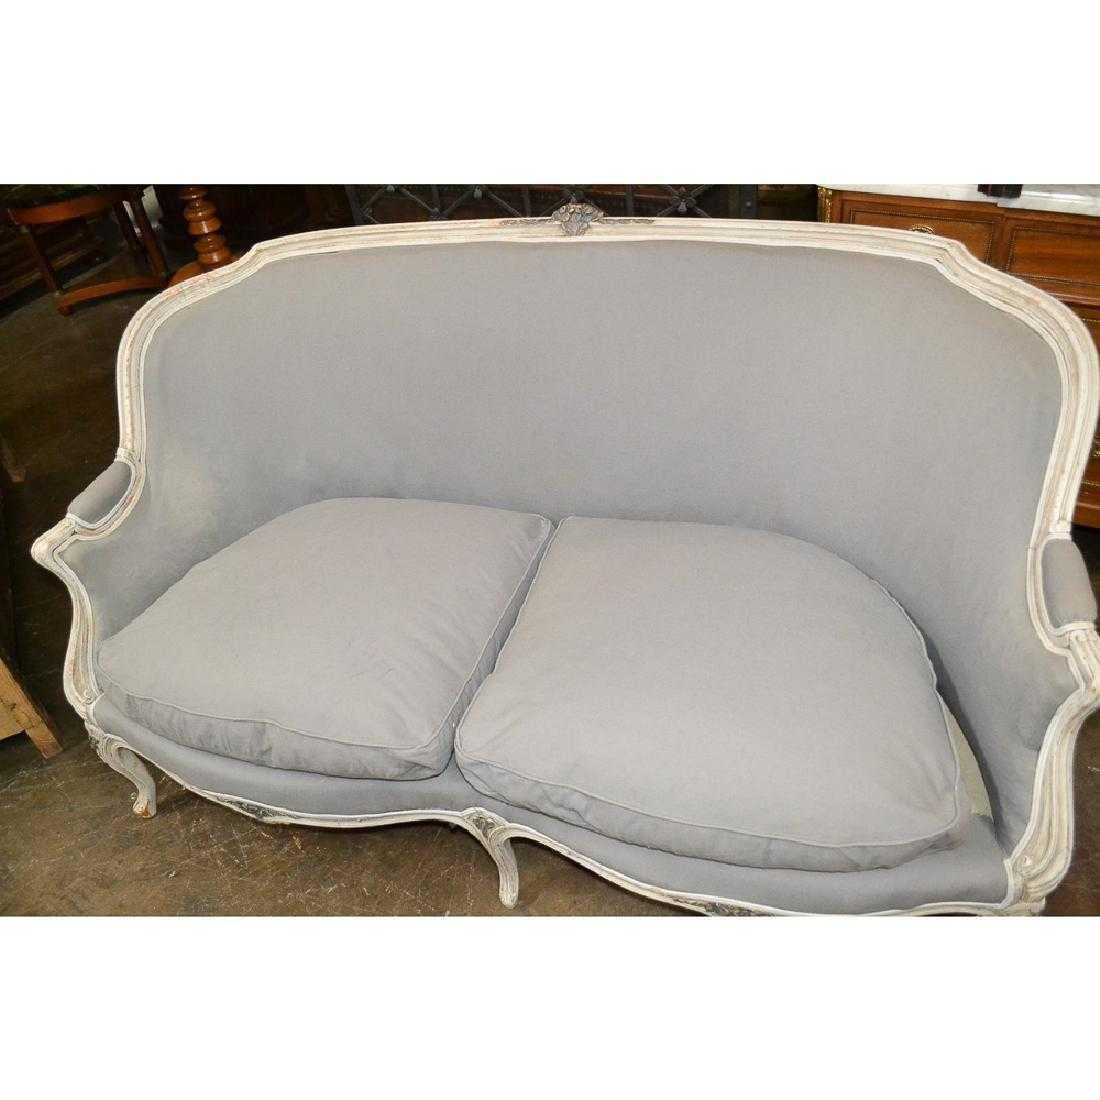 Superb quality French Provincial carved, painted, and upholstered settee. Clean lines. Elegant look.